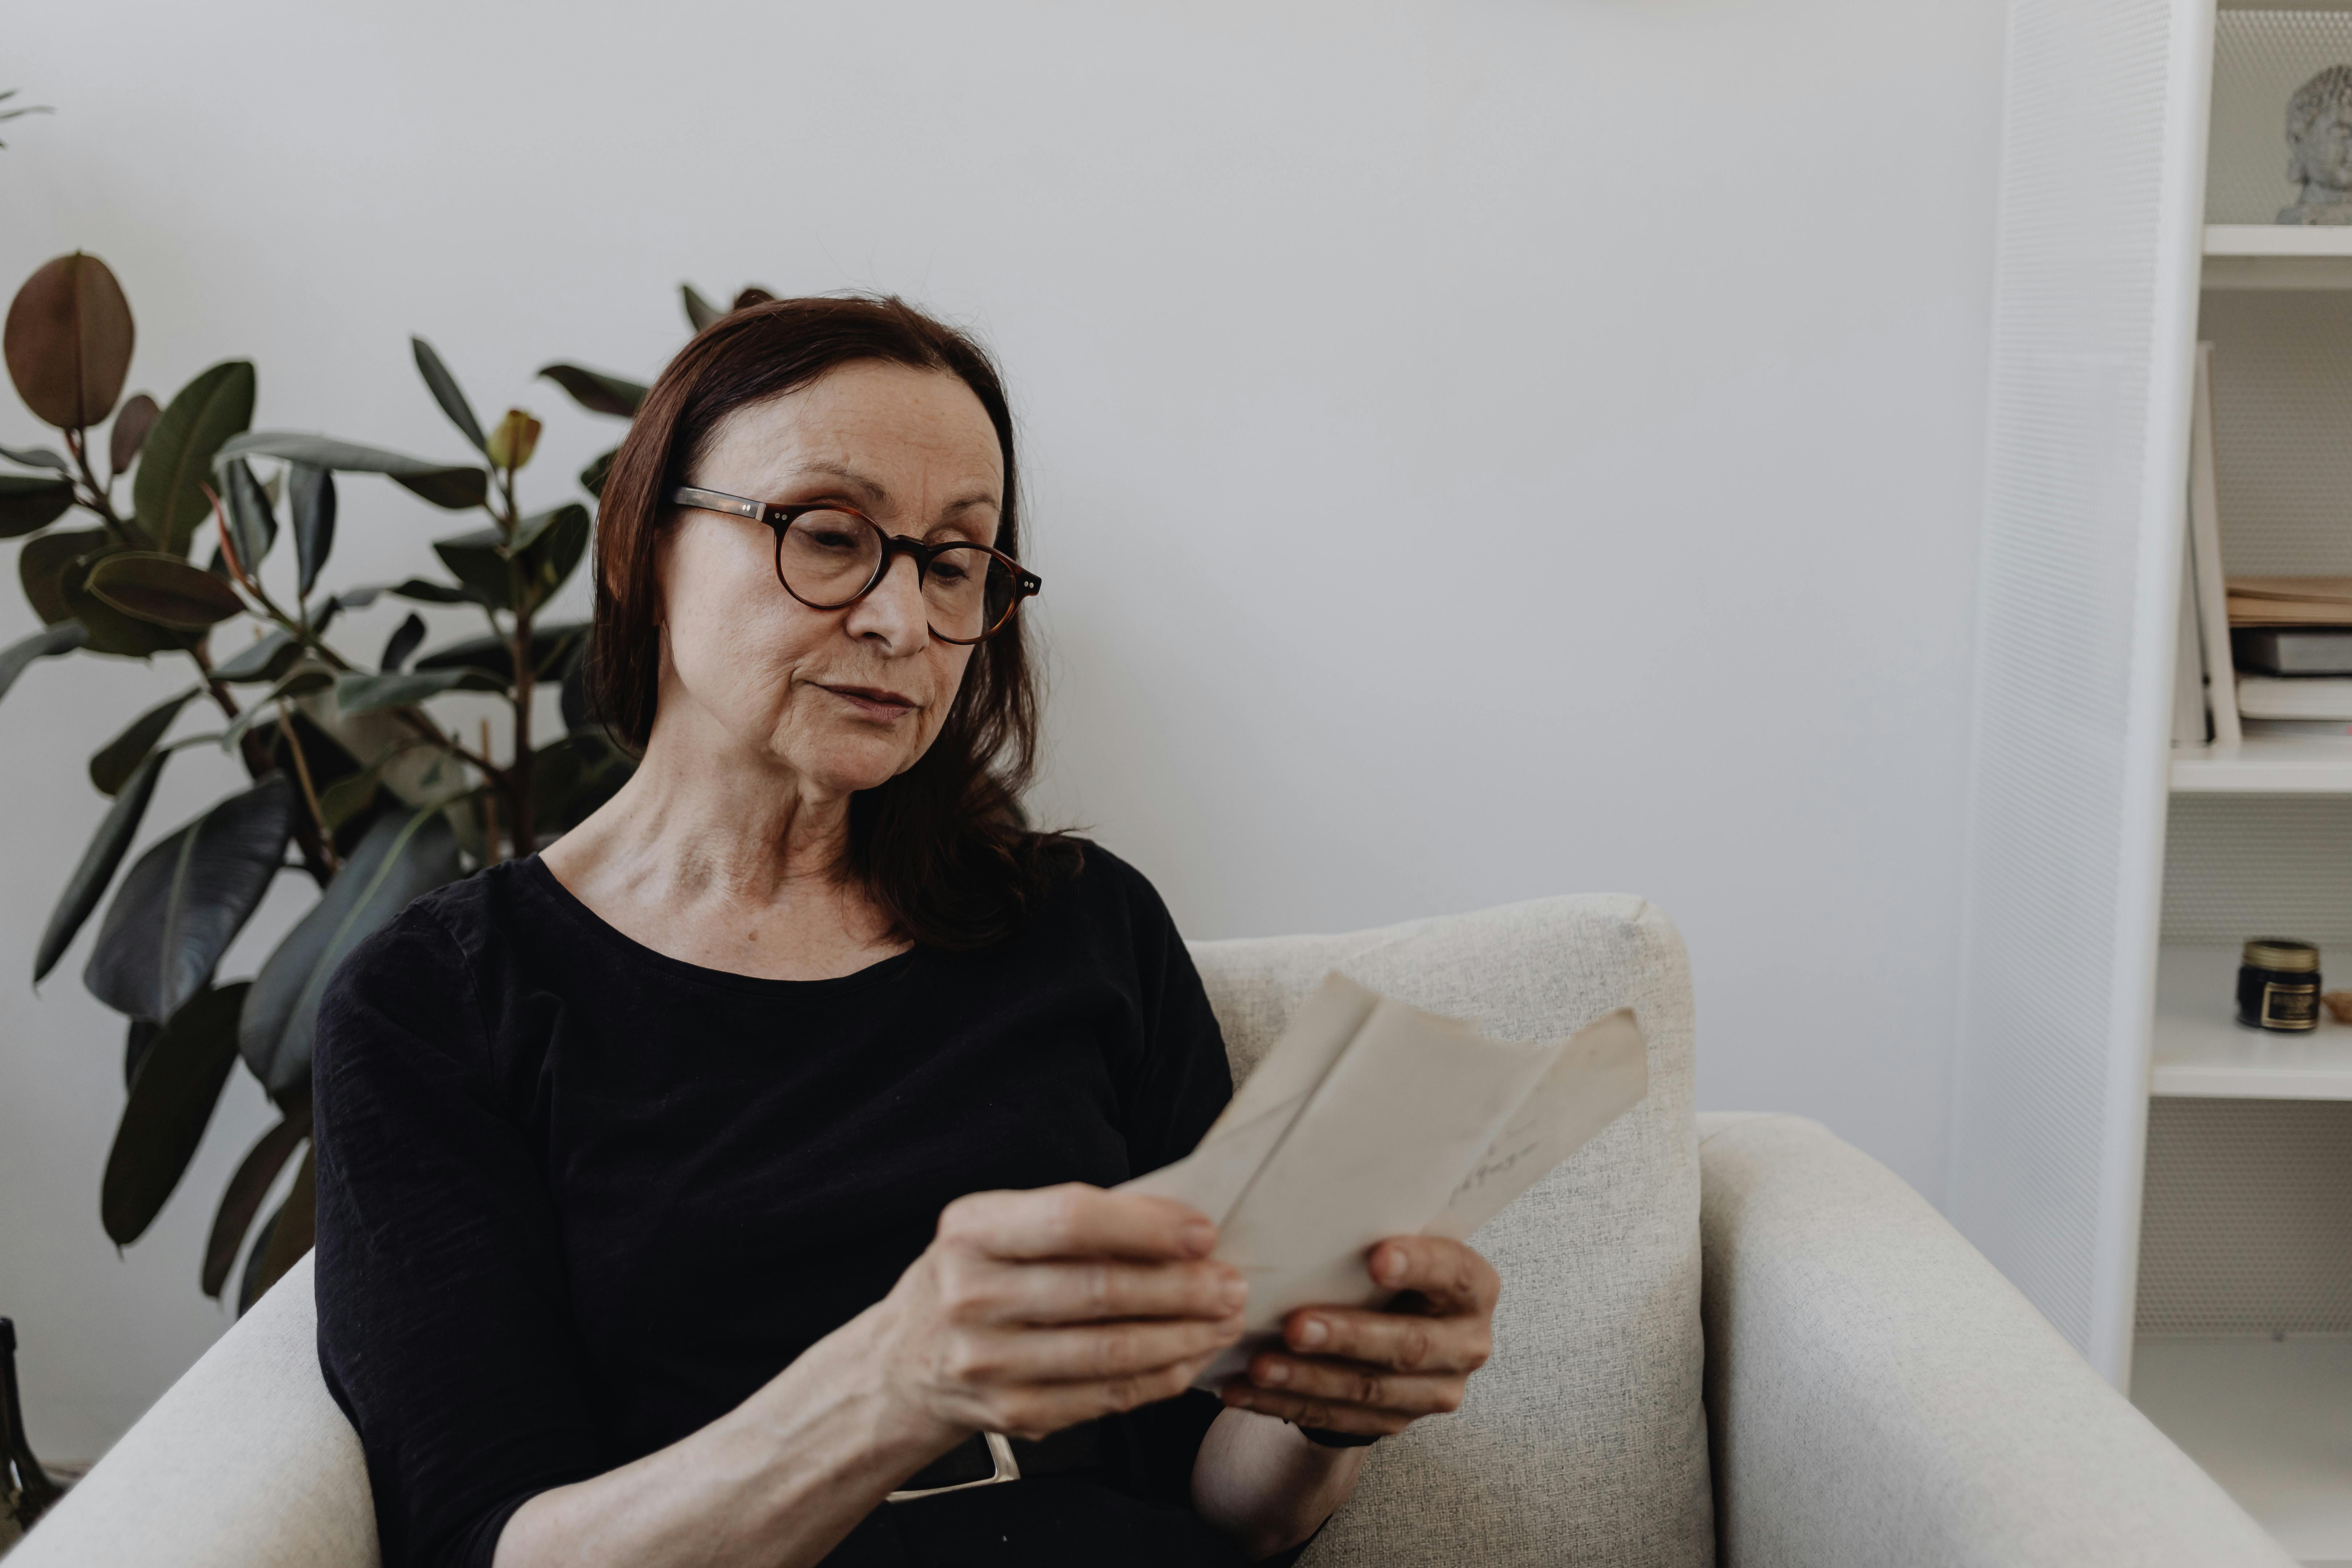 A older woman alone at home | Source: Pexels